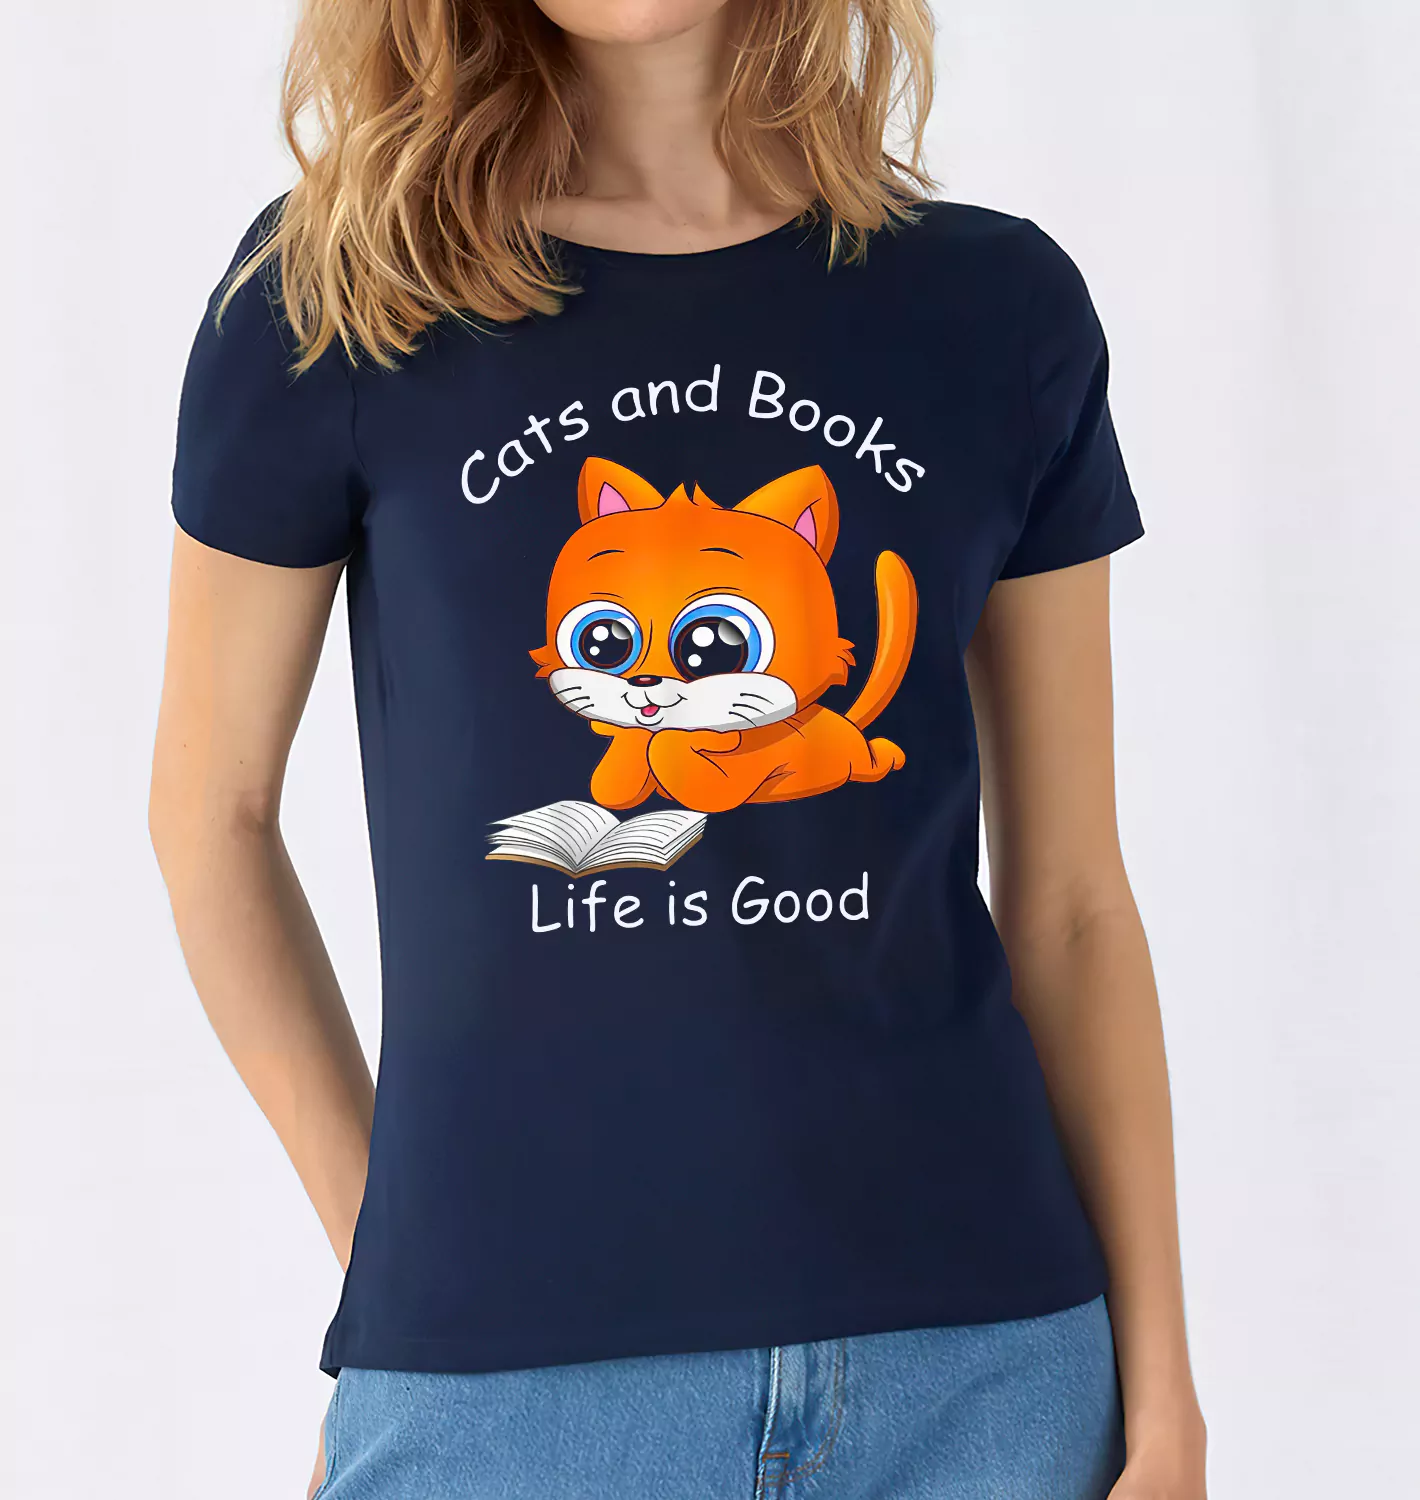 girl wearing Cats and books life is good t shirt red cat design